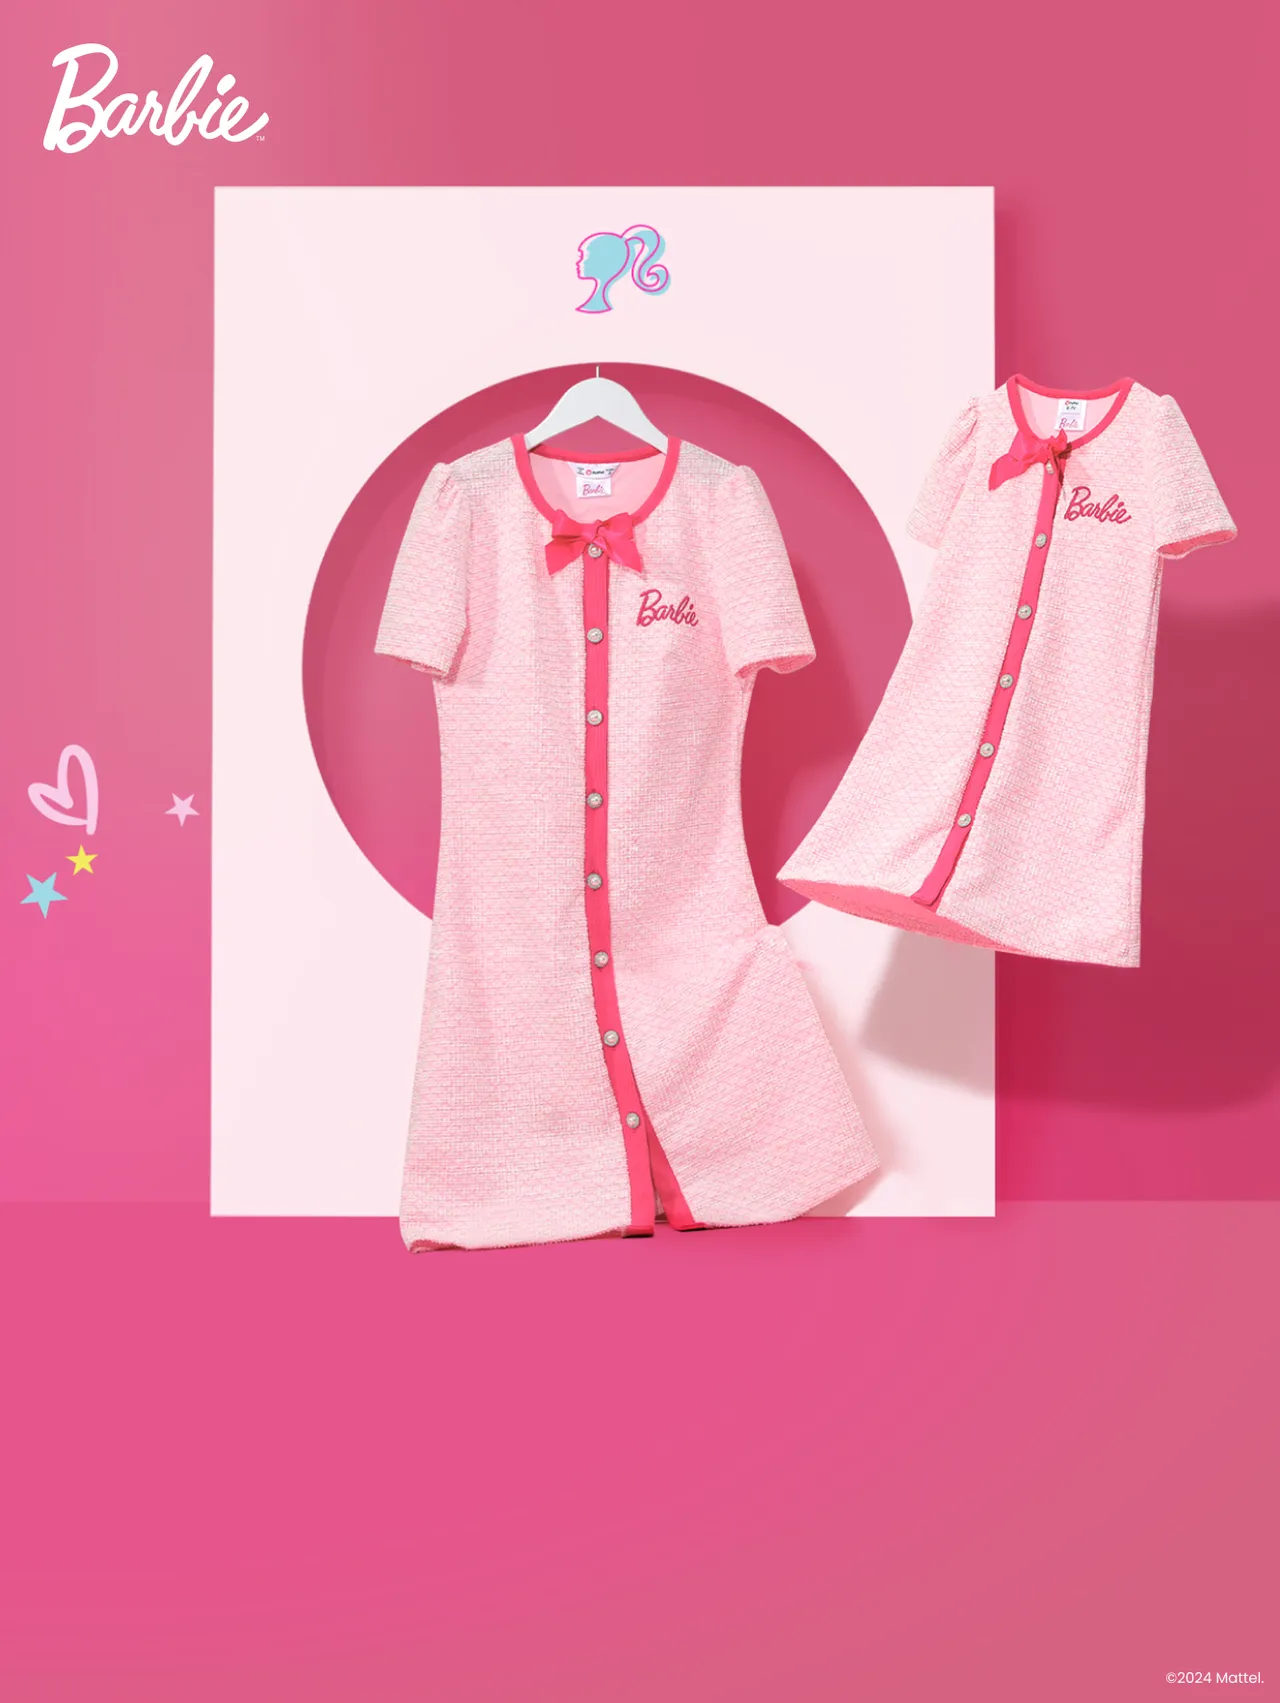 Click it to join Match in Style with Barbie activity